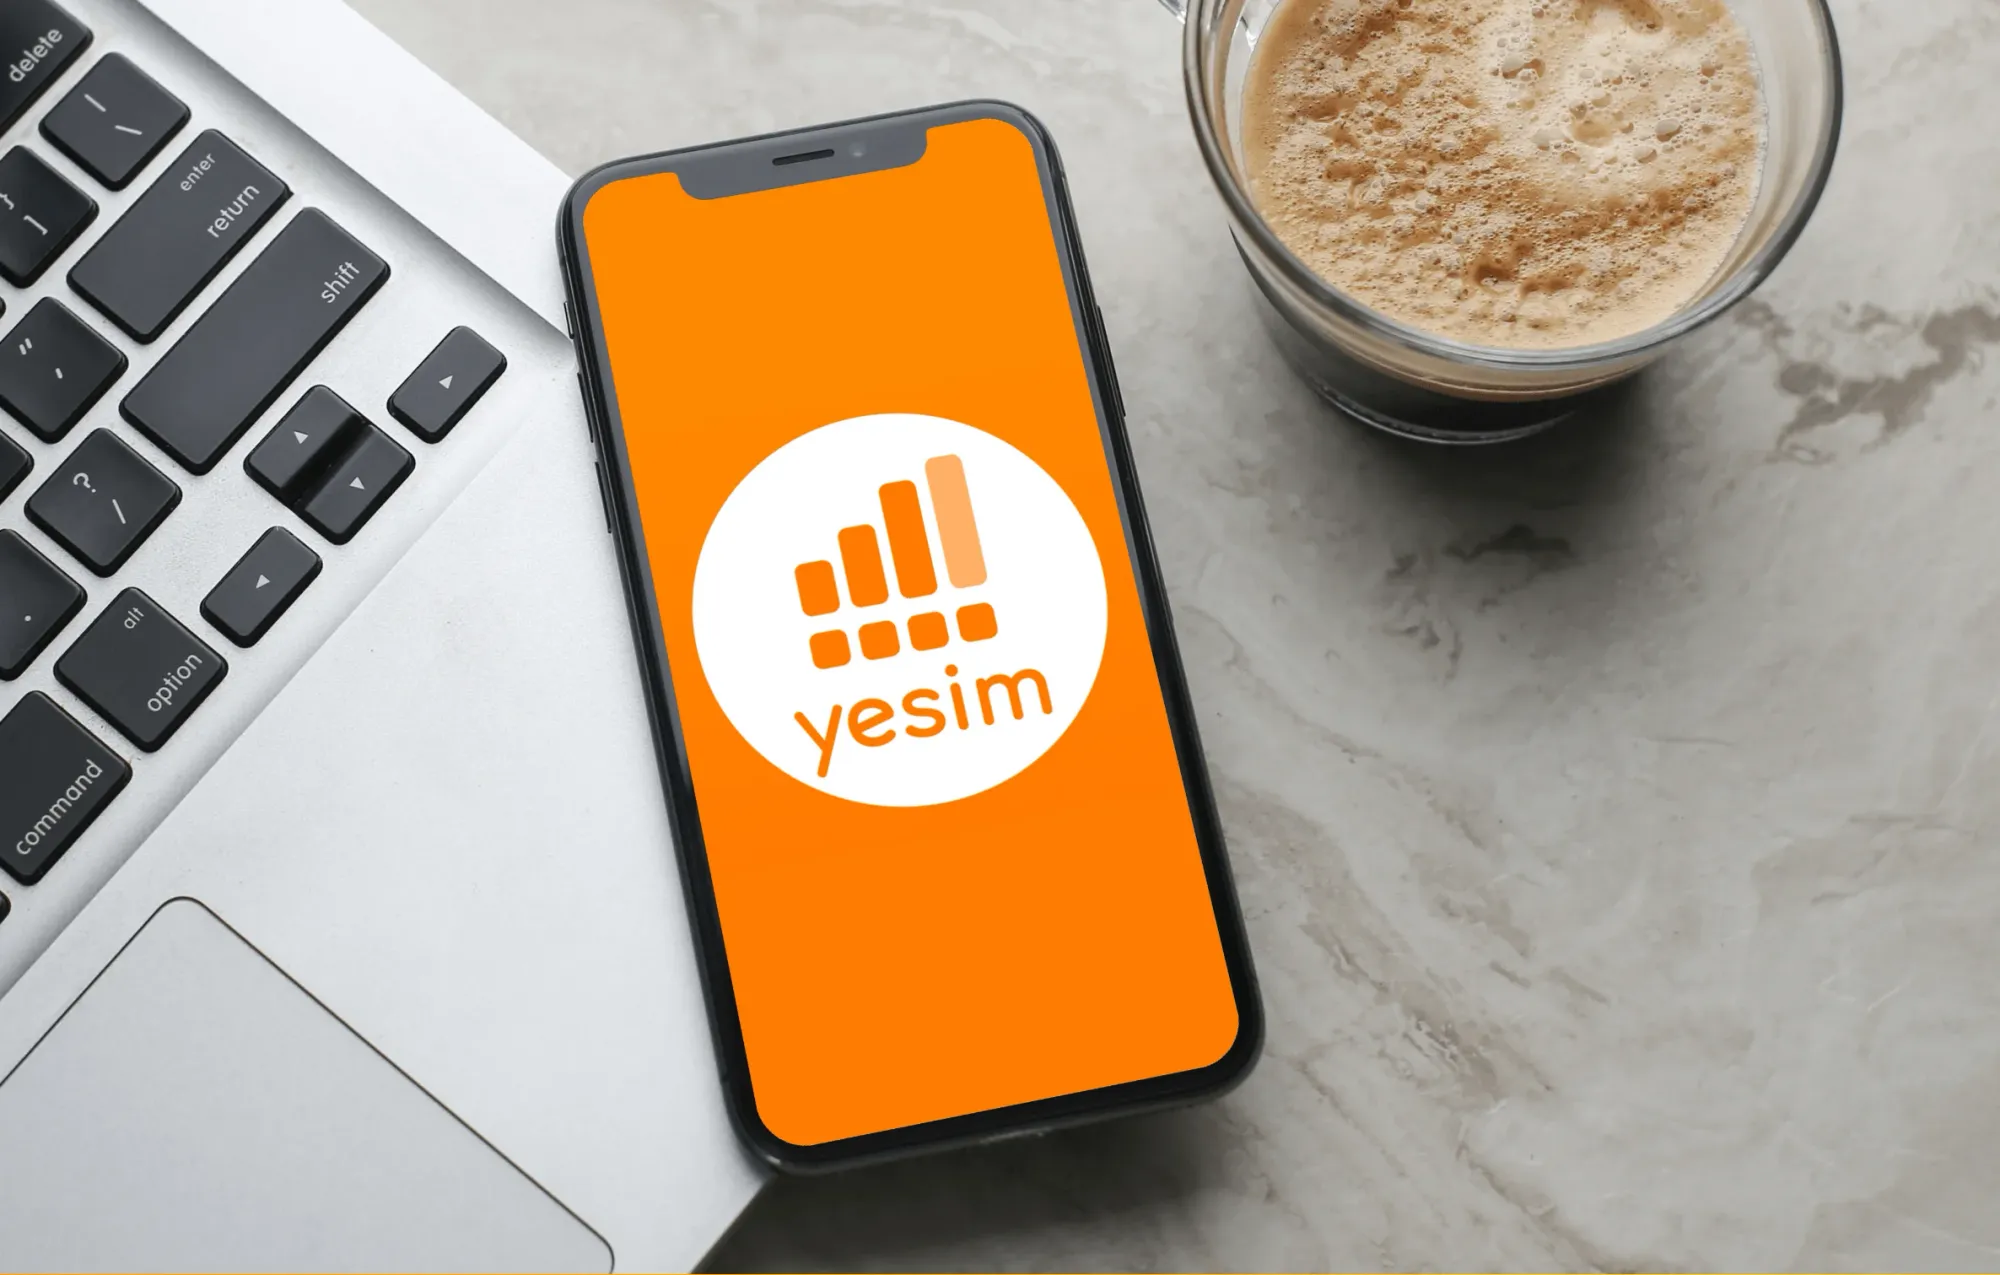 Yesim app on a phone next to a laptop and coffee cup